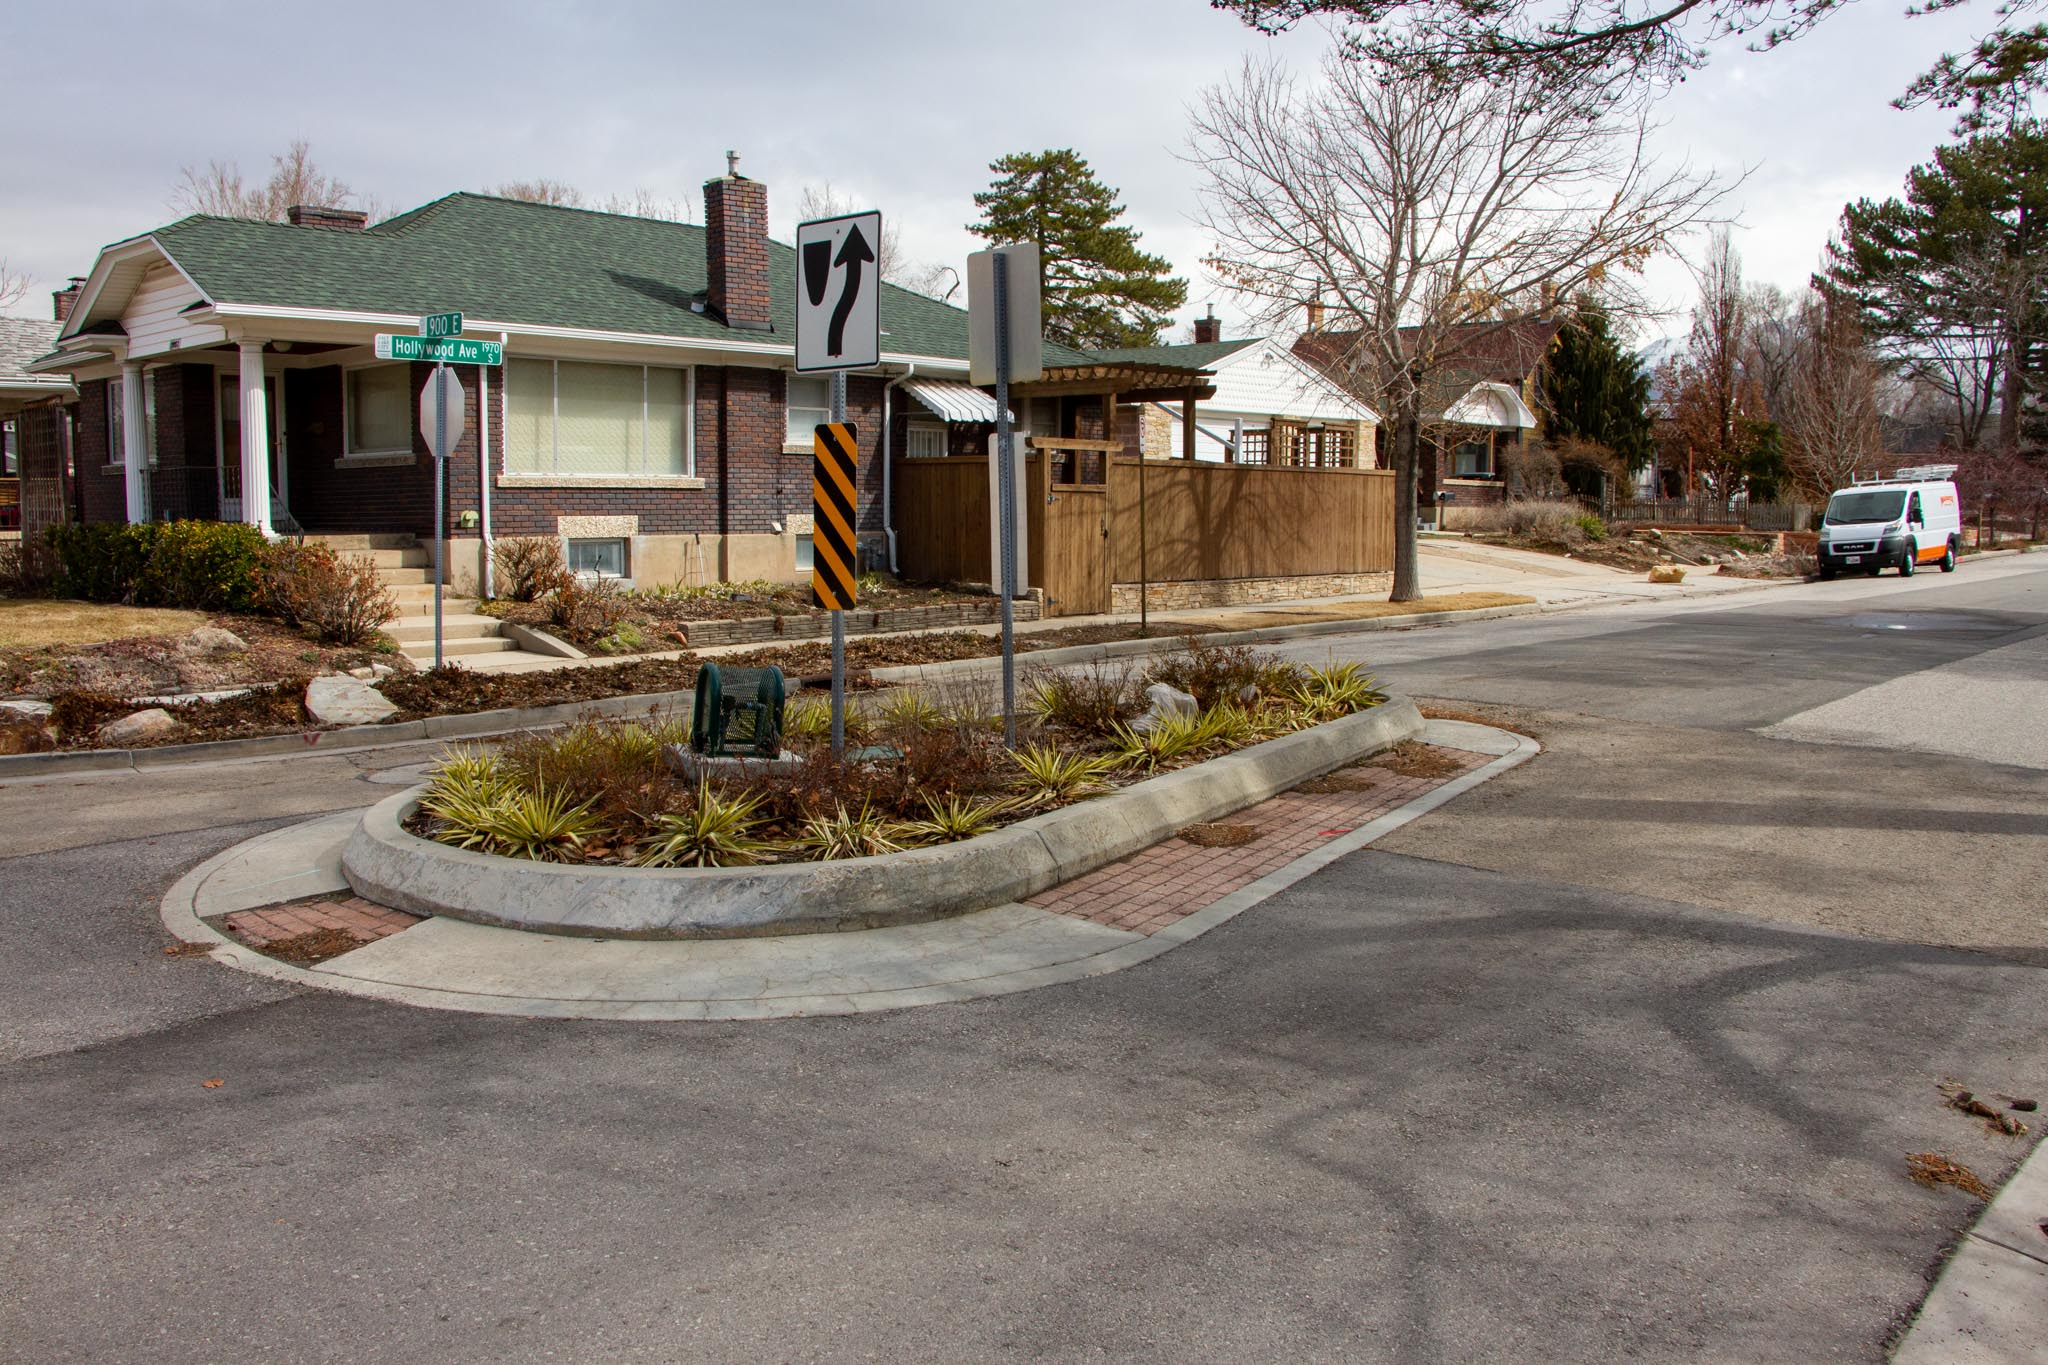 A planted median at the entrance to Hollywood Avenue helps calm traffic entering a residential neighborhood